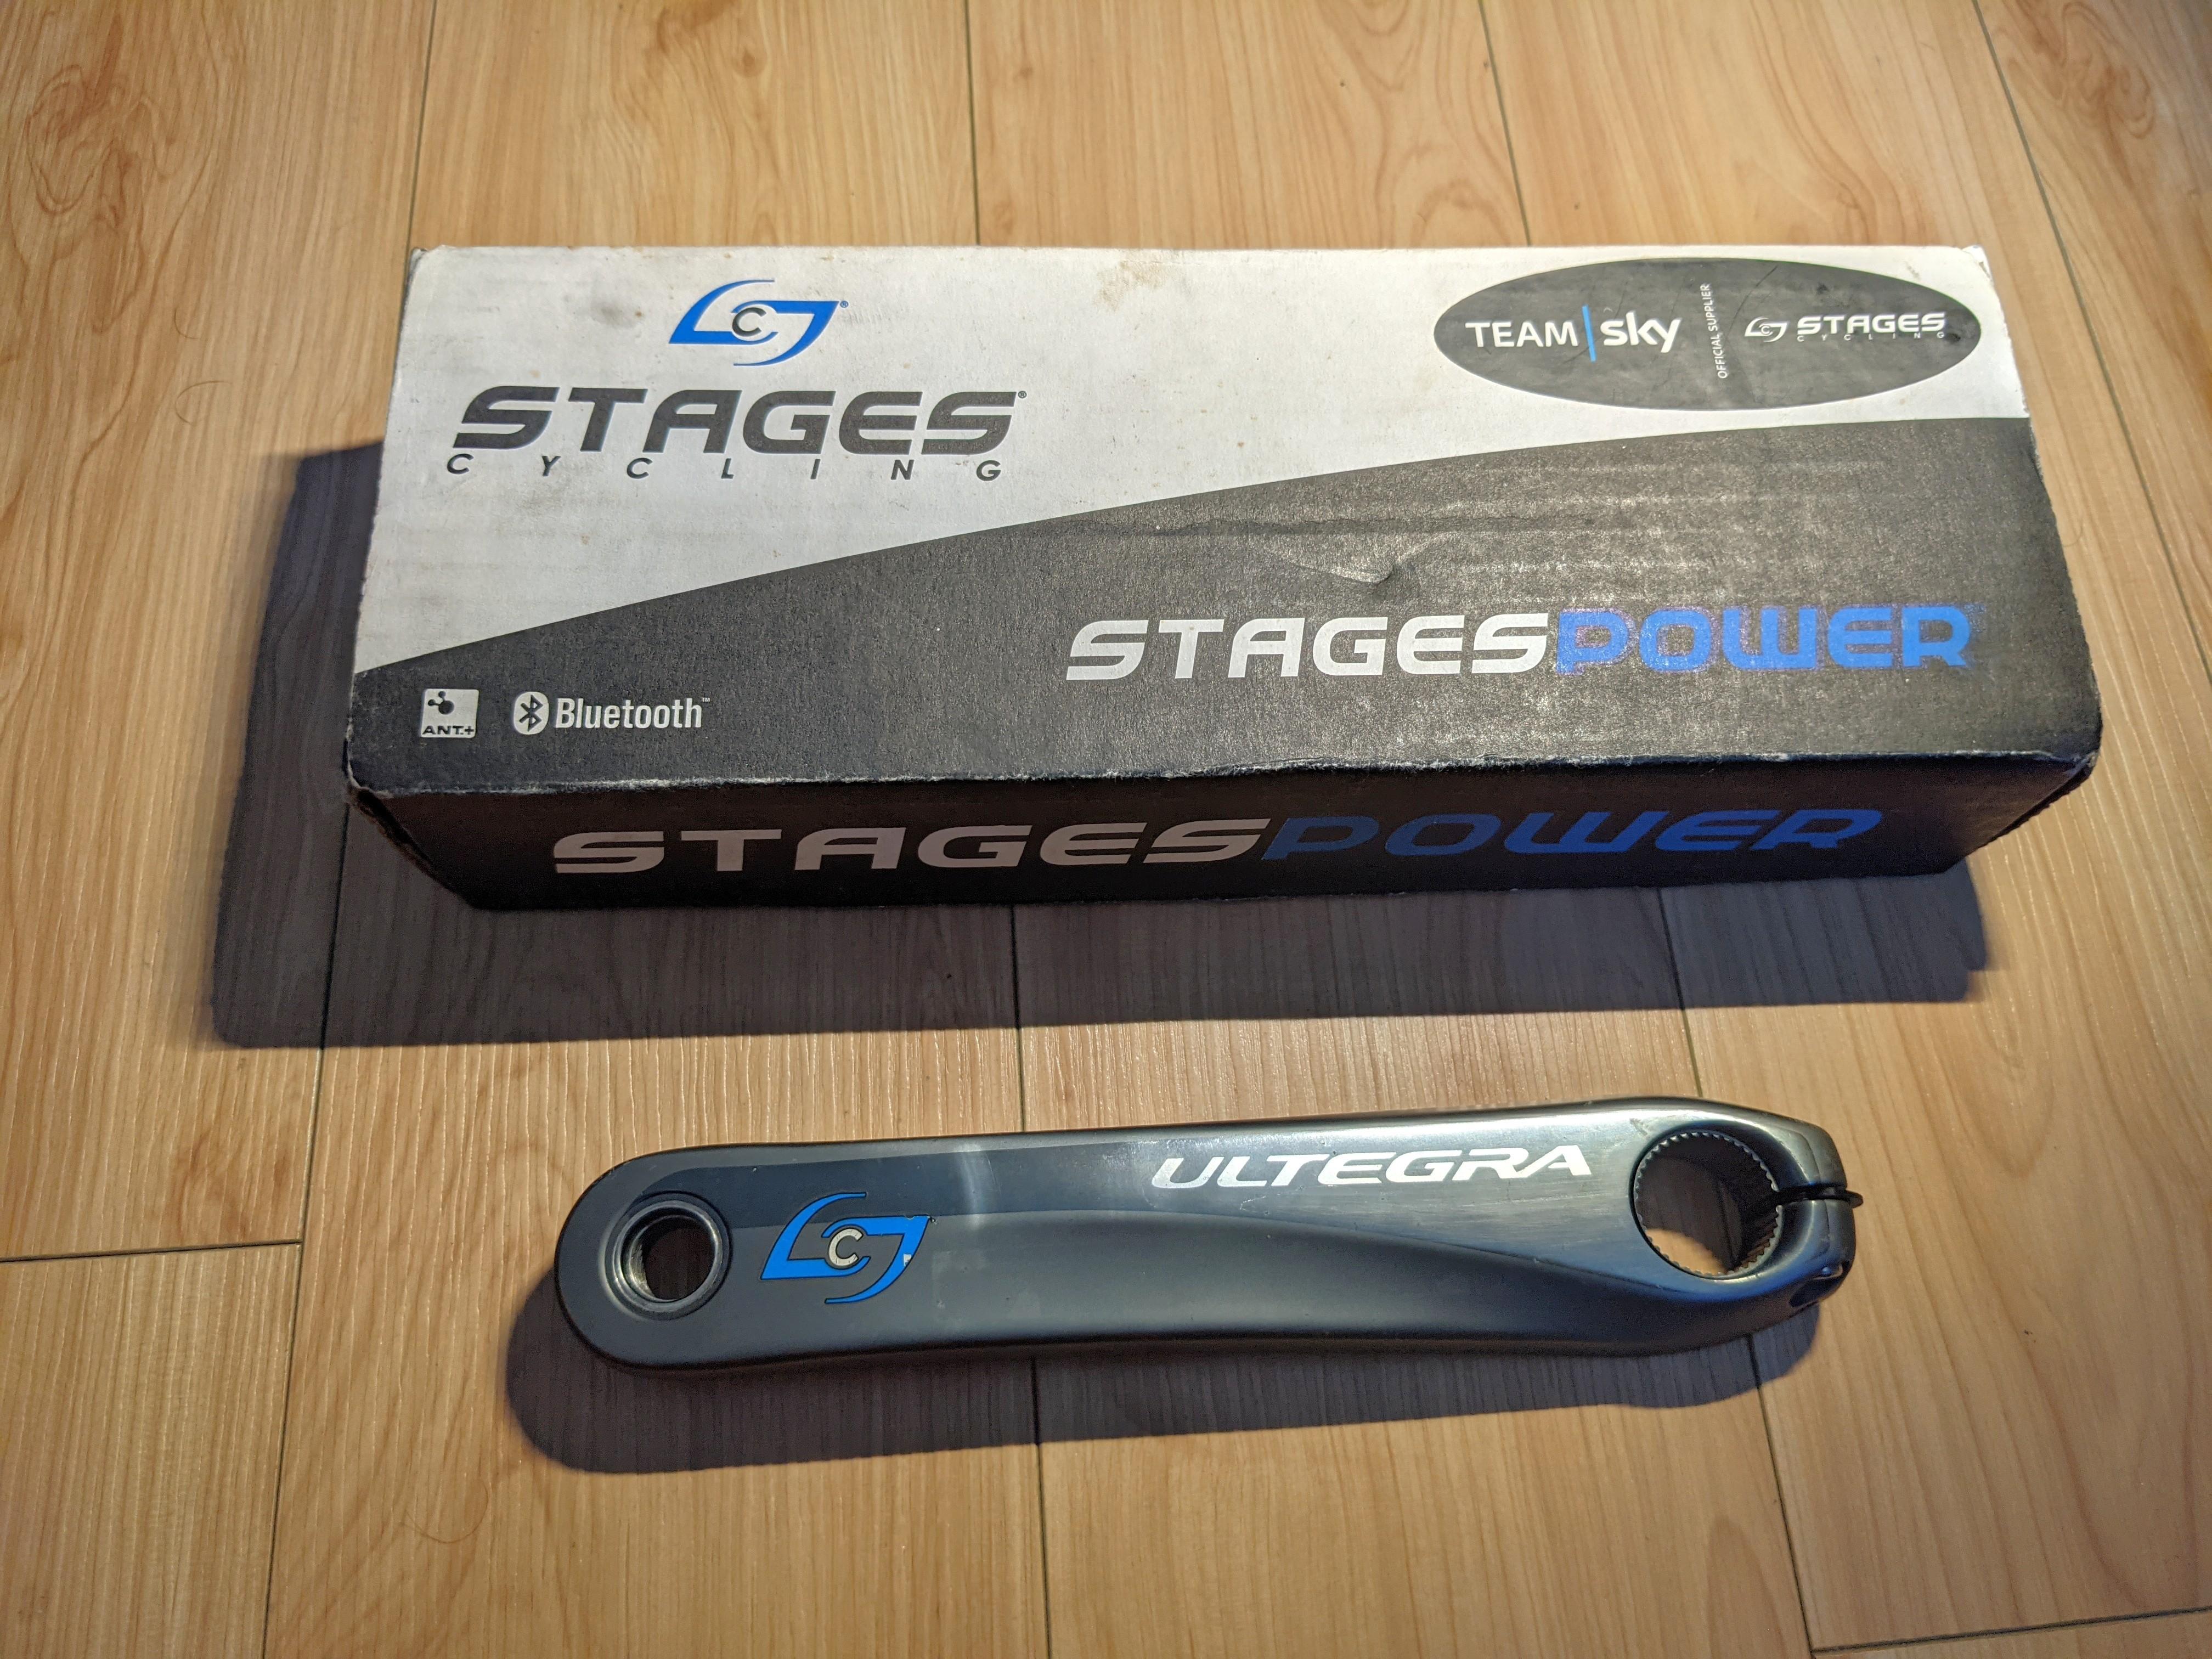 170mm stages Power パワーメーター アルテグラ6800 - パーツ